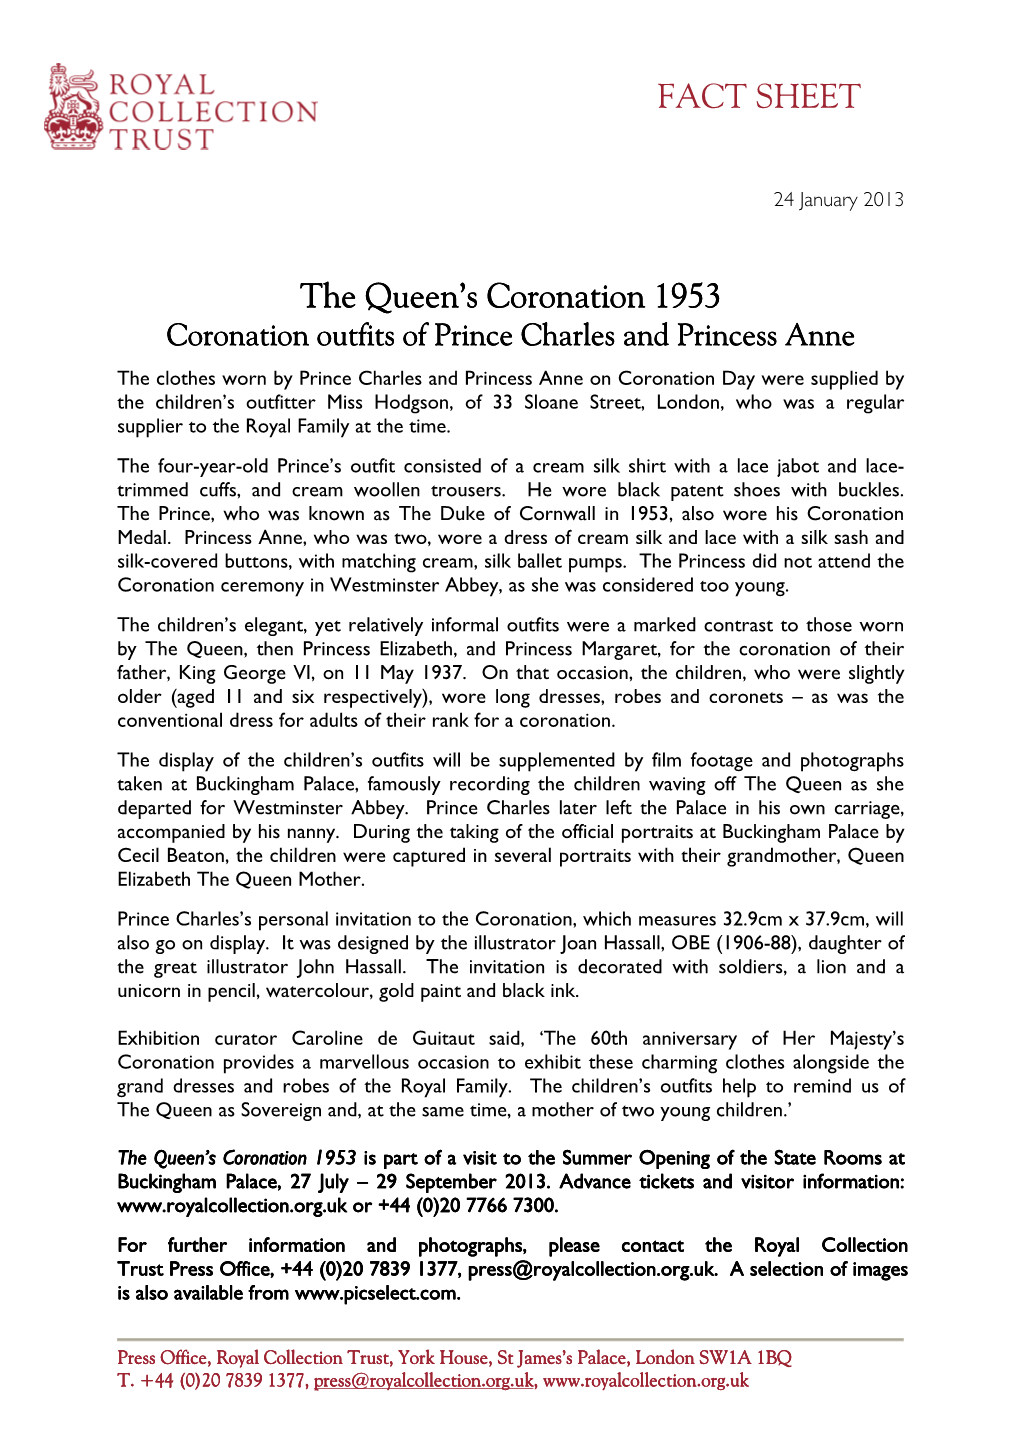 Fact Sheet the Queen's Coronation 1953 Children's Outfits